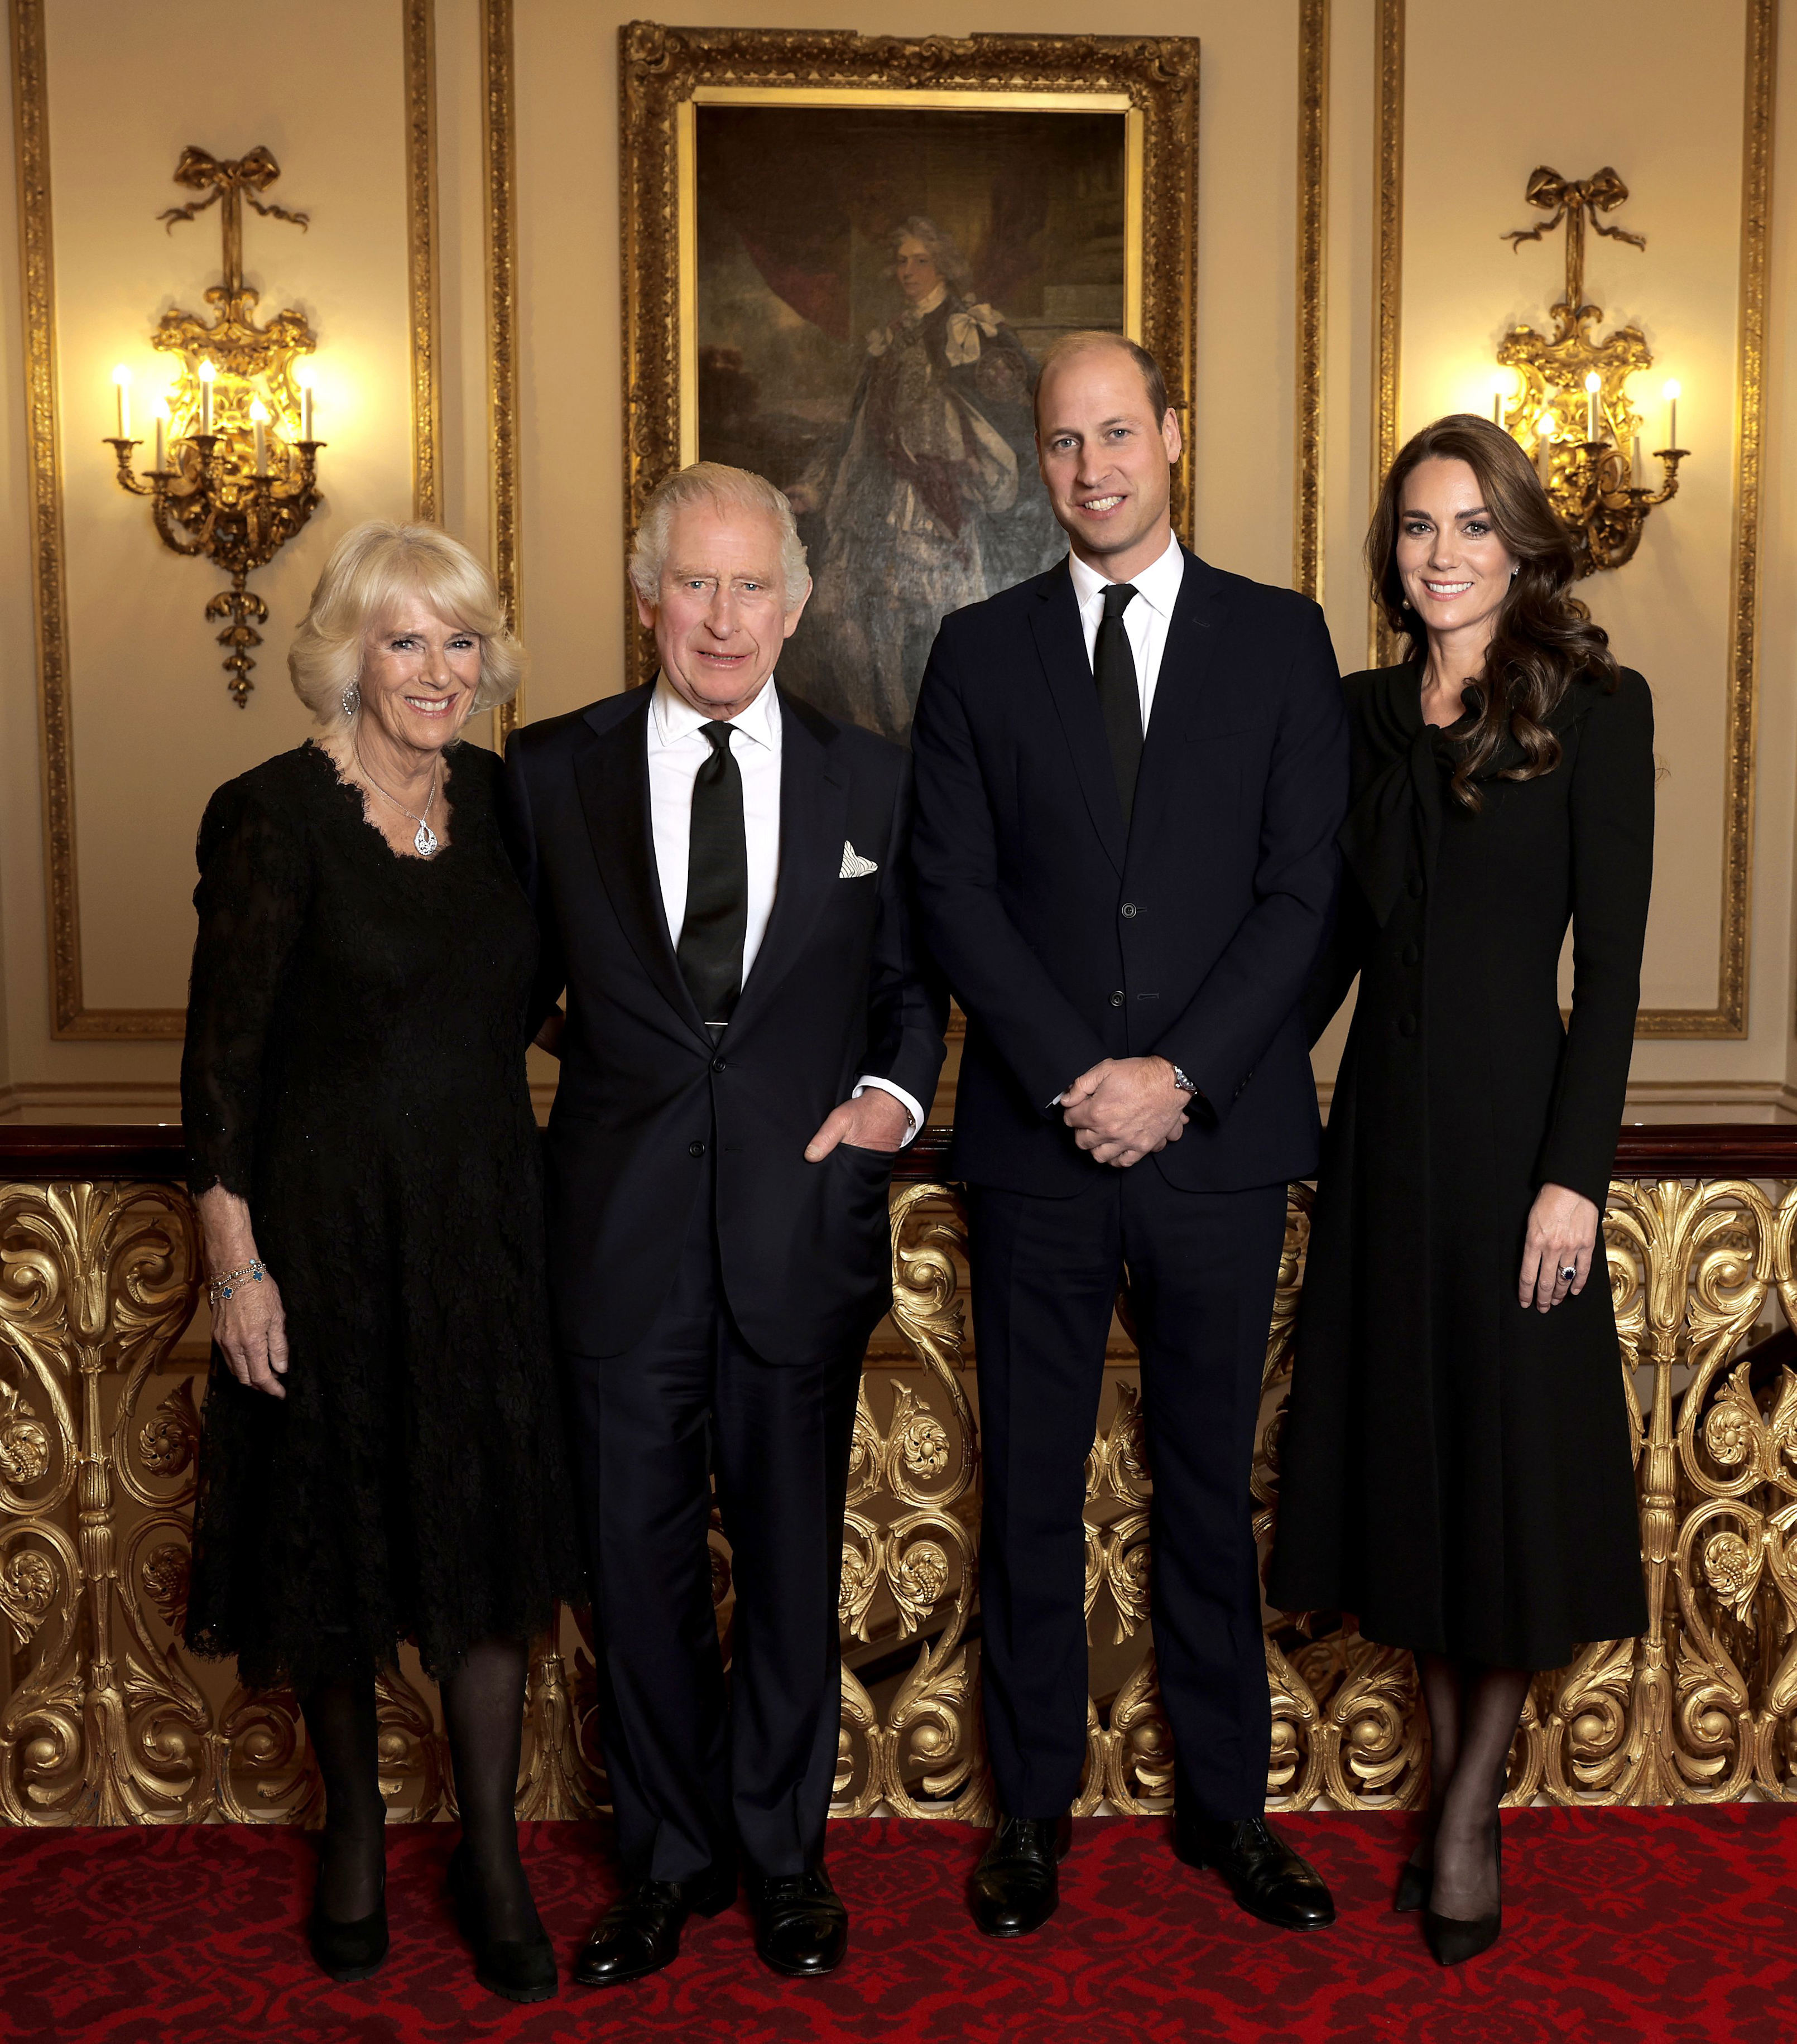 <p>On Oct. 1, 2022, Buckingham Palace released this photo taken on Sept. 18, 2022 -- the eve of Queen Elizabeth II's funeral -- making it clear which royals are at the heart of the new monarchy: King Charles III and Queen Consort Camilla posed next to Prince William and Princess Kate ahead of a reception for heads of state and official overseas guests at Buckingham Palace in London.</p>